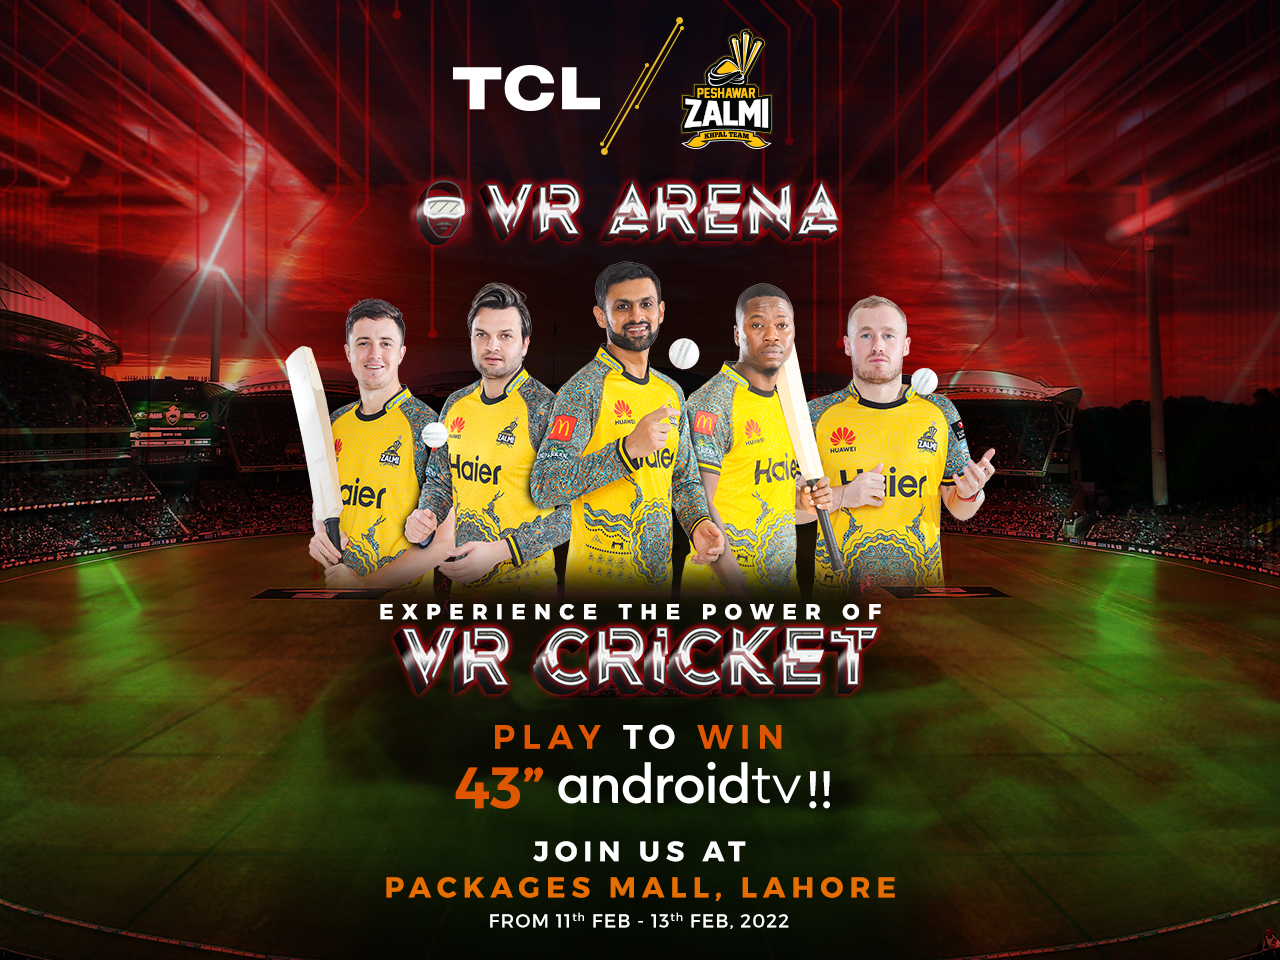 TCL and Peshawar Zalmi continue their game-changing partnership for the fifth consecutive year